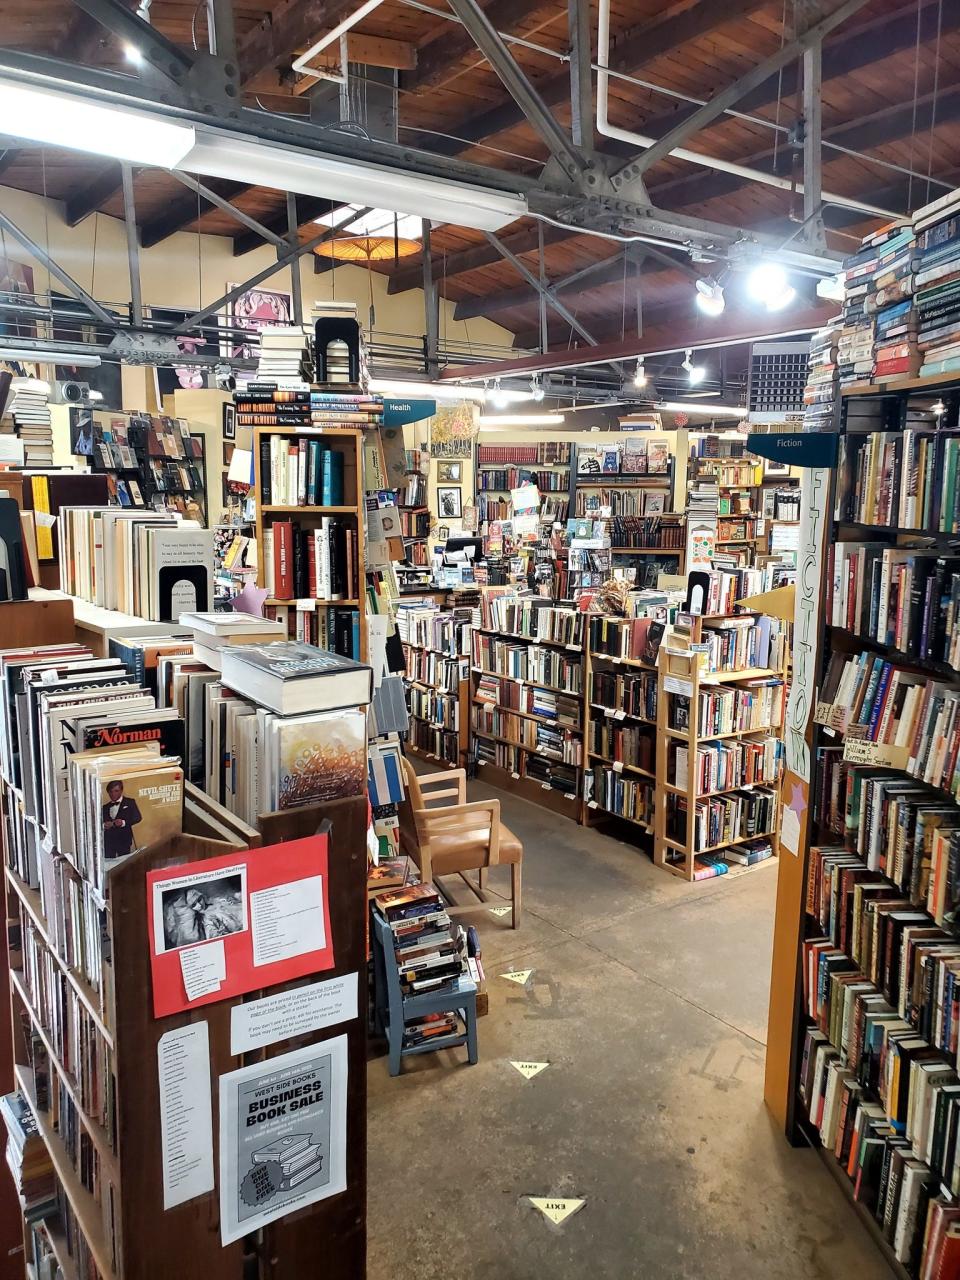 West Side Books, an independent bookstore in Denver, was founded in 1997 and sells new and used books.